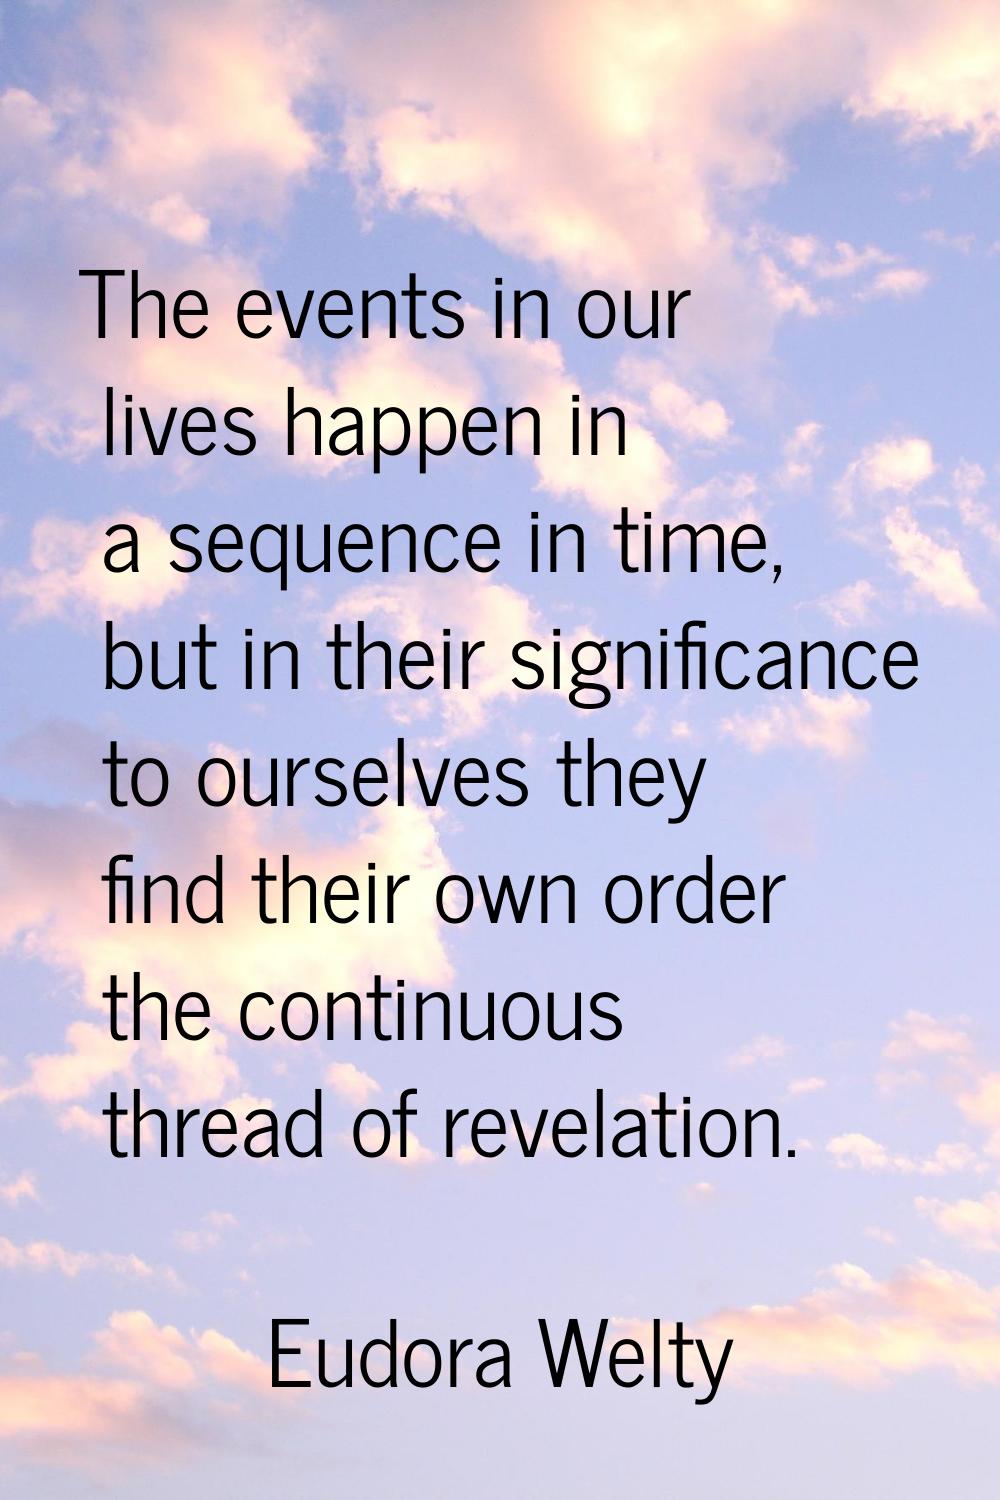 The events in our lives happen in a sequence in time, but in their significance to ourselves they f